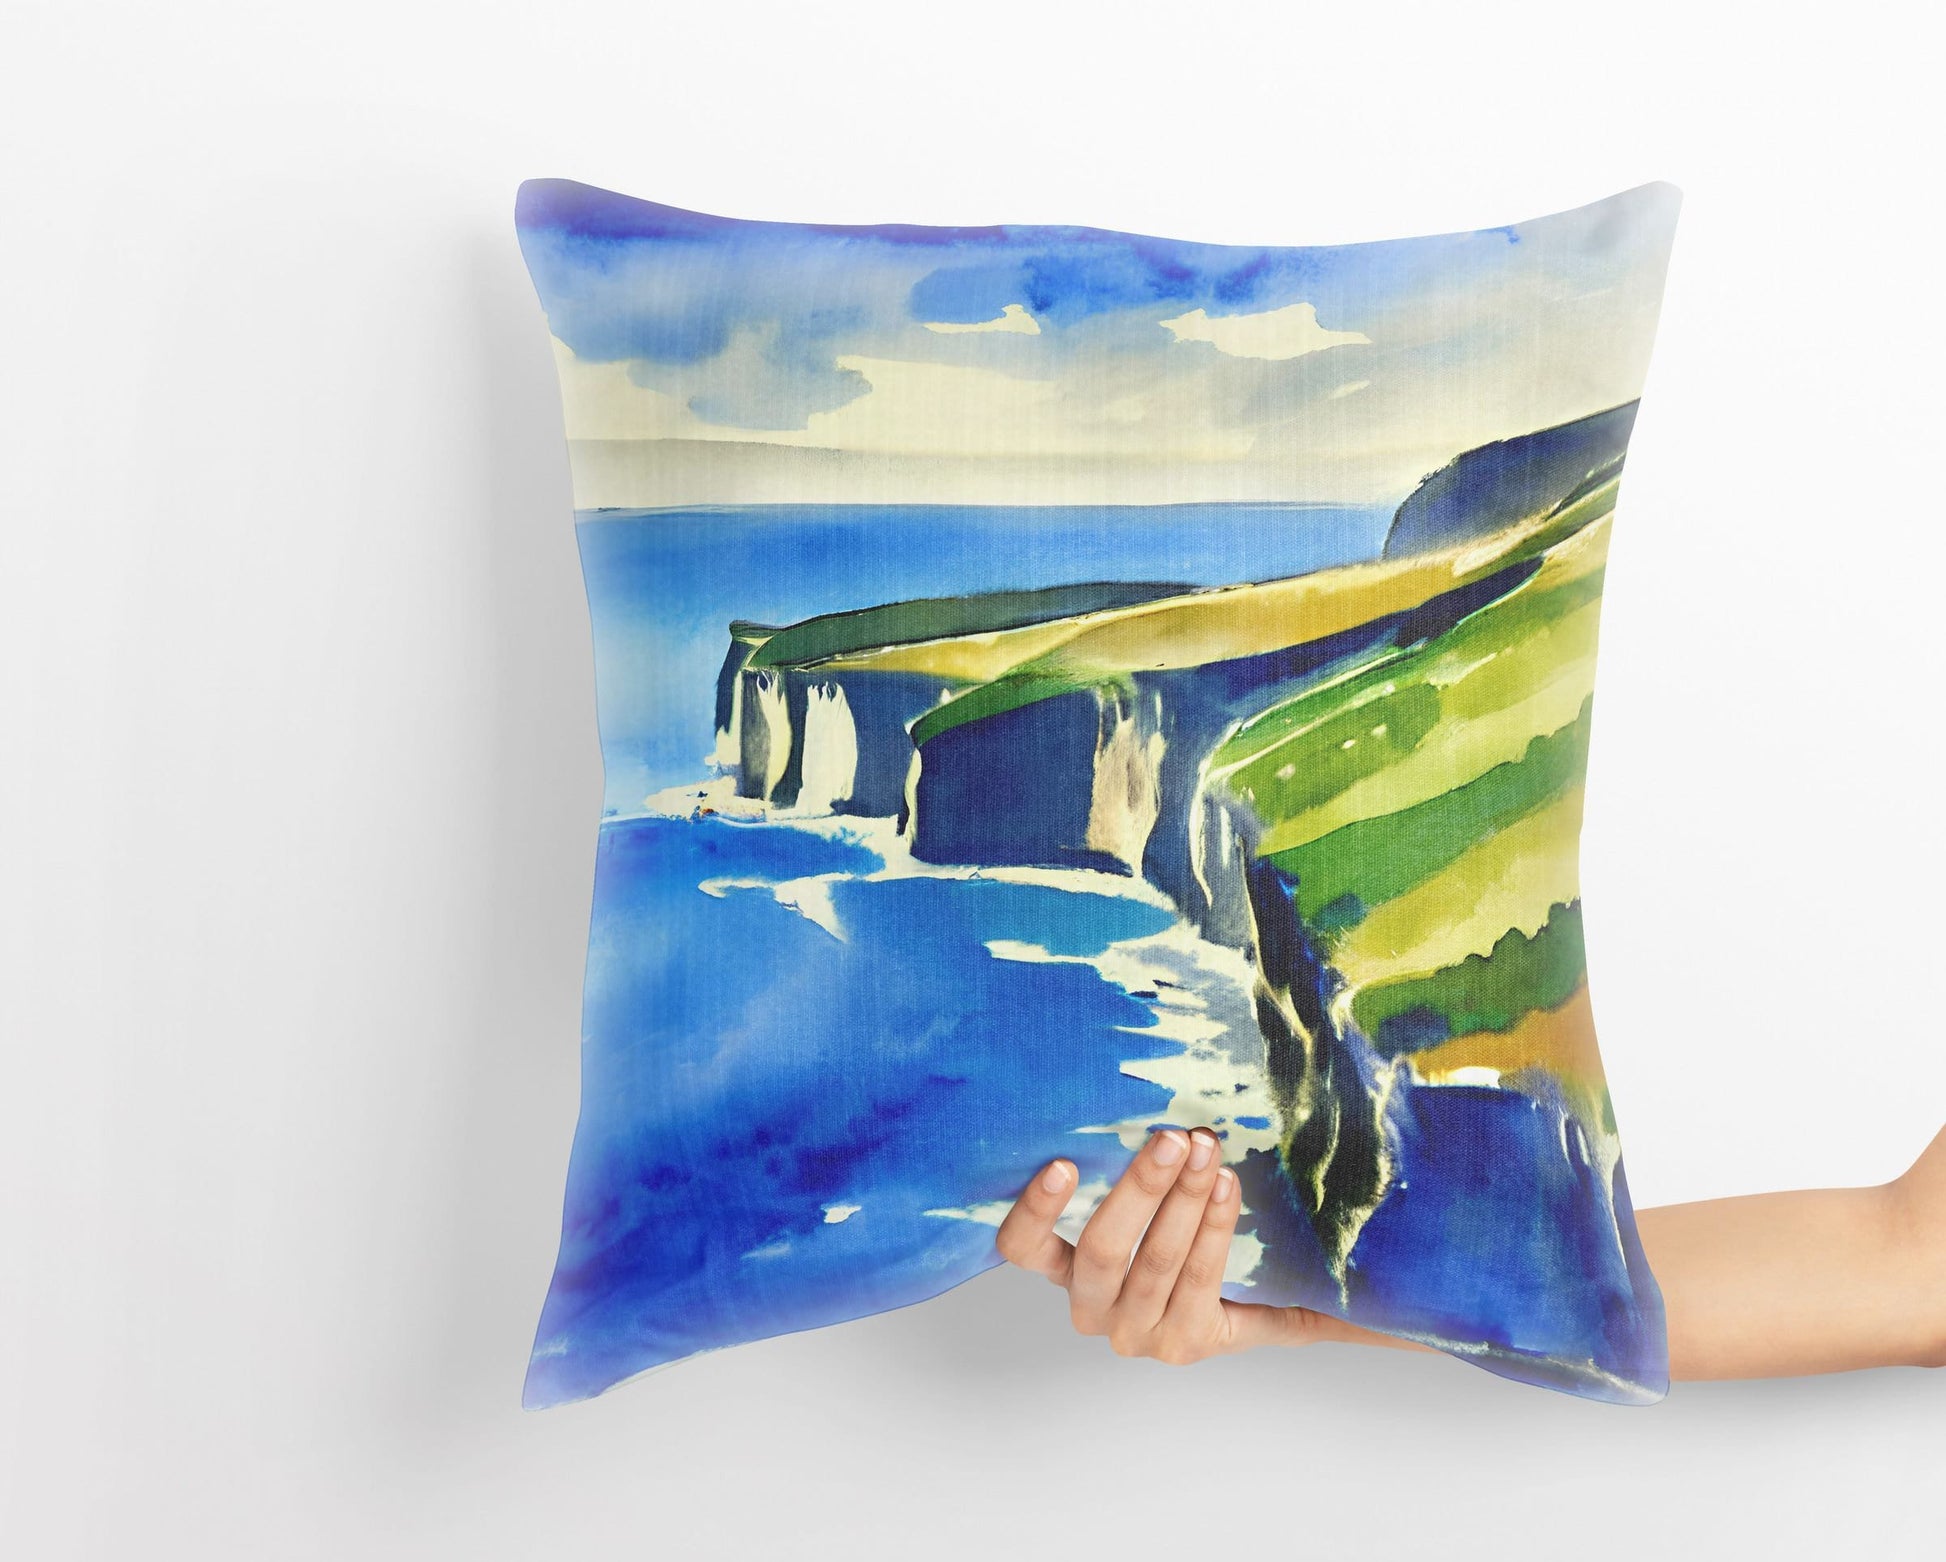 Cliff By The Sea, Throw Pillow Cover, Abstract Throw Pillow Cover, Art Pillow, Contemporary Pillow, Square Pillow, Home Decor Pillow